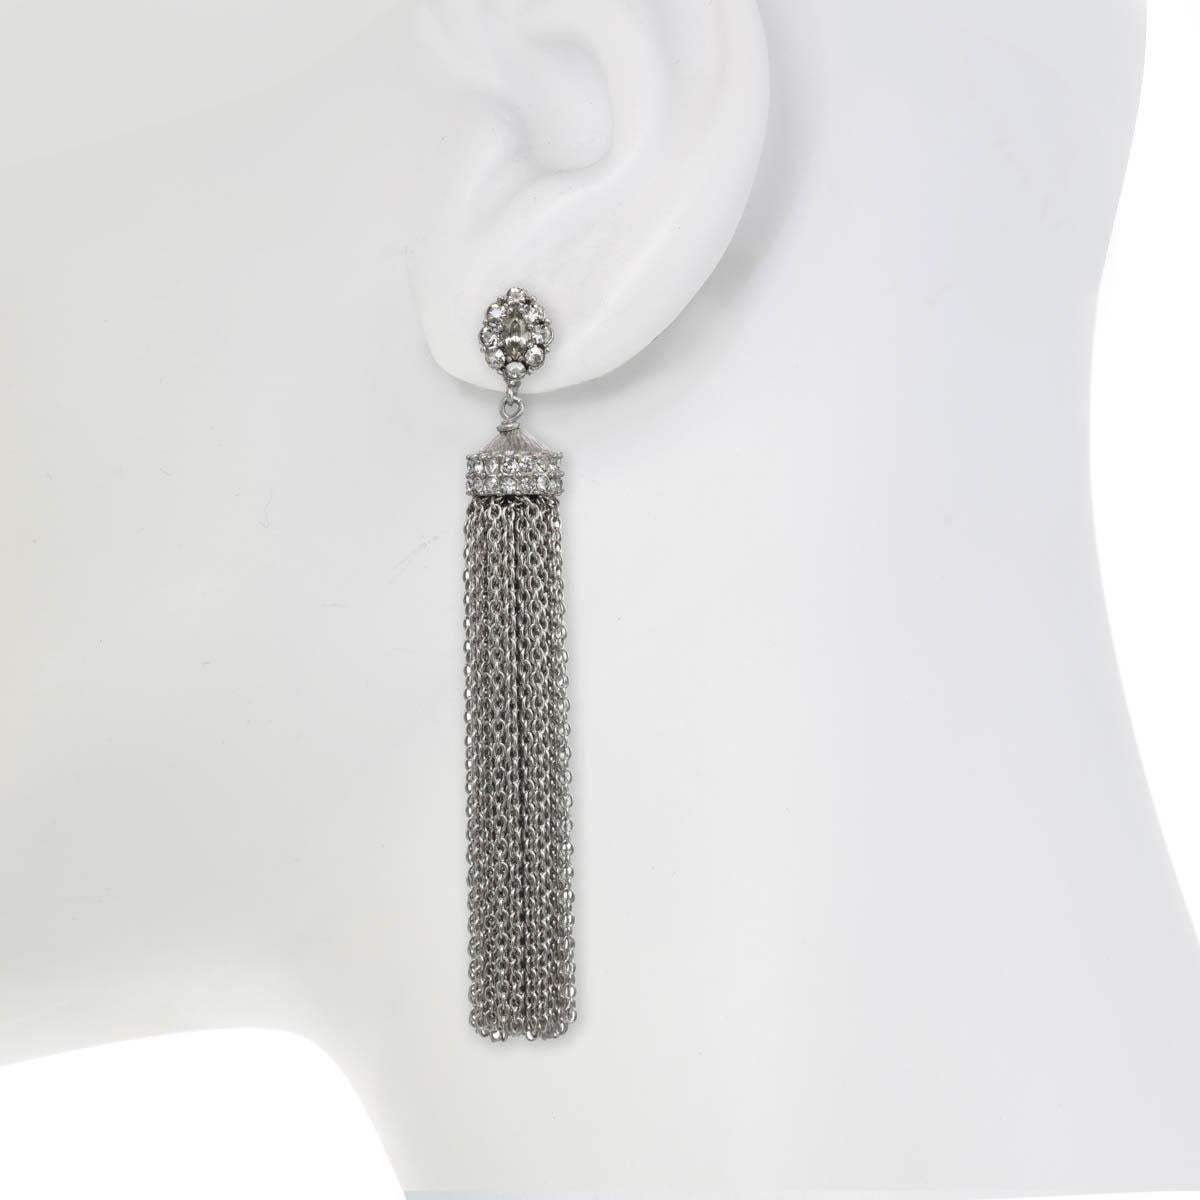 Tassels are timelessly chic and the perfect accessory for every season and every occasion!  A showroom show stopper, these earrings are perfect accessory to wear from day to night. 

PLEASE NOTE: The pieces available are not vintage and are not